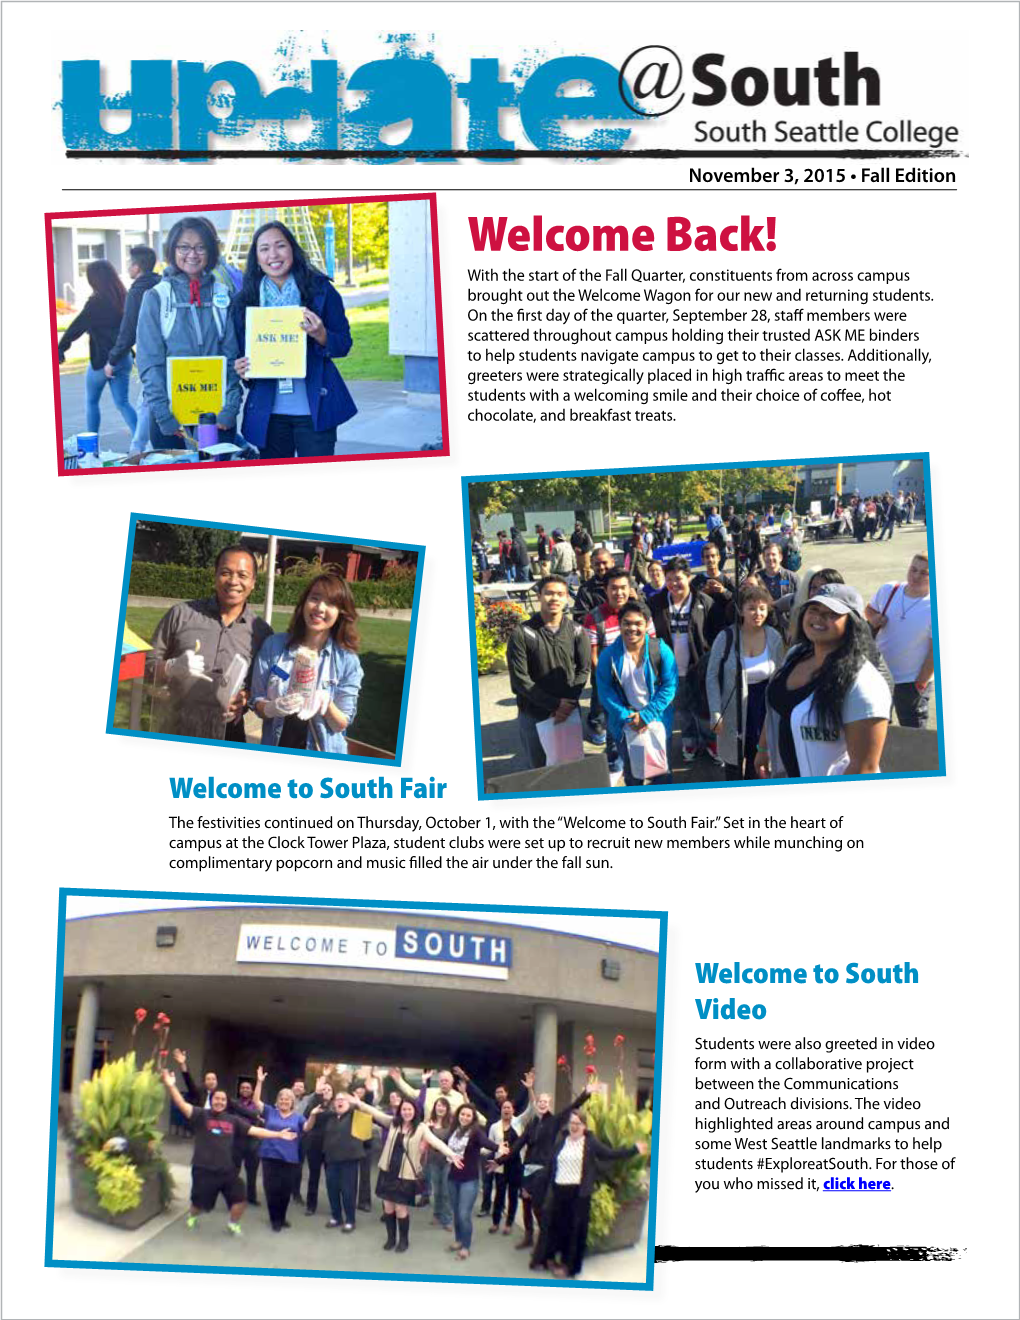 Welcome Back! with the Start of the Fall Quarter, Constituents from Across Campus Brought out the Welcome Wagon for Our New and Returning Students